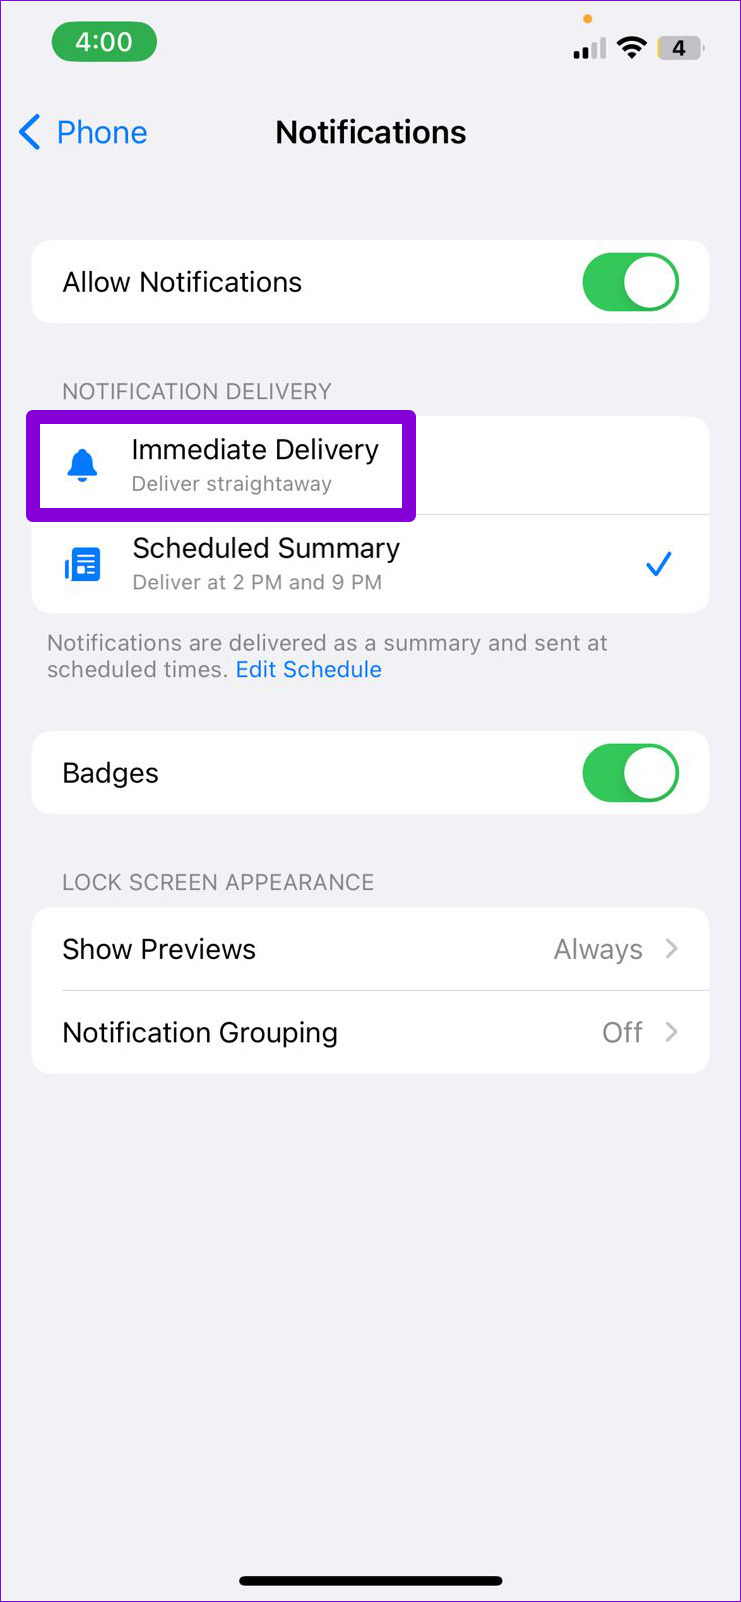 Enable Immediate Delivery for Phone App Notifications on iPhone